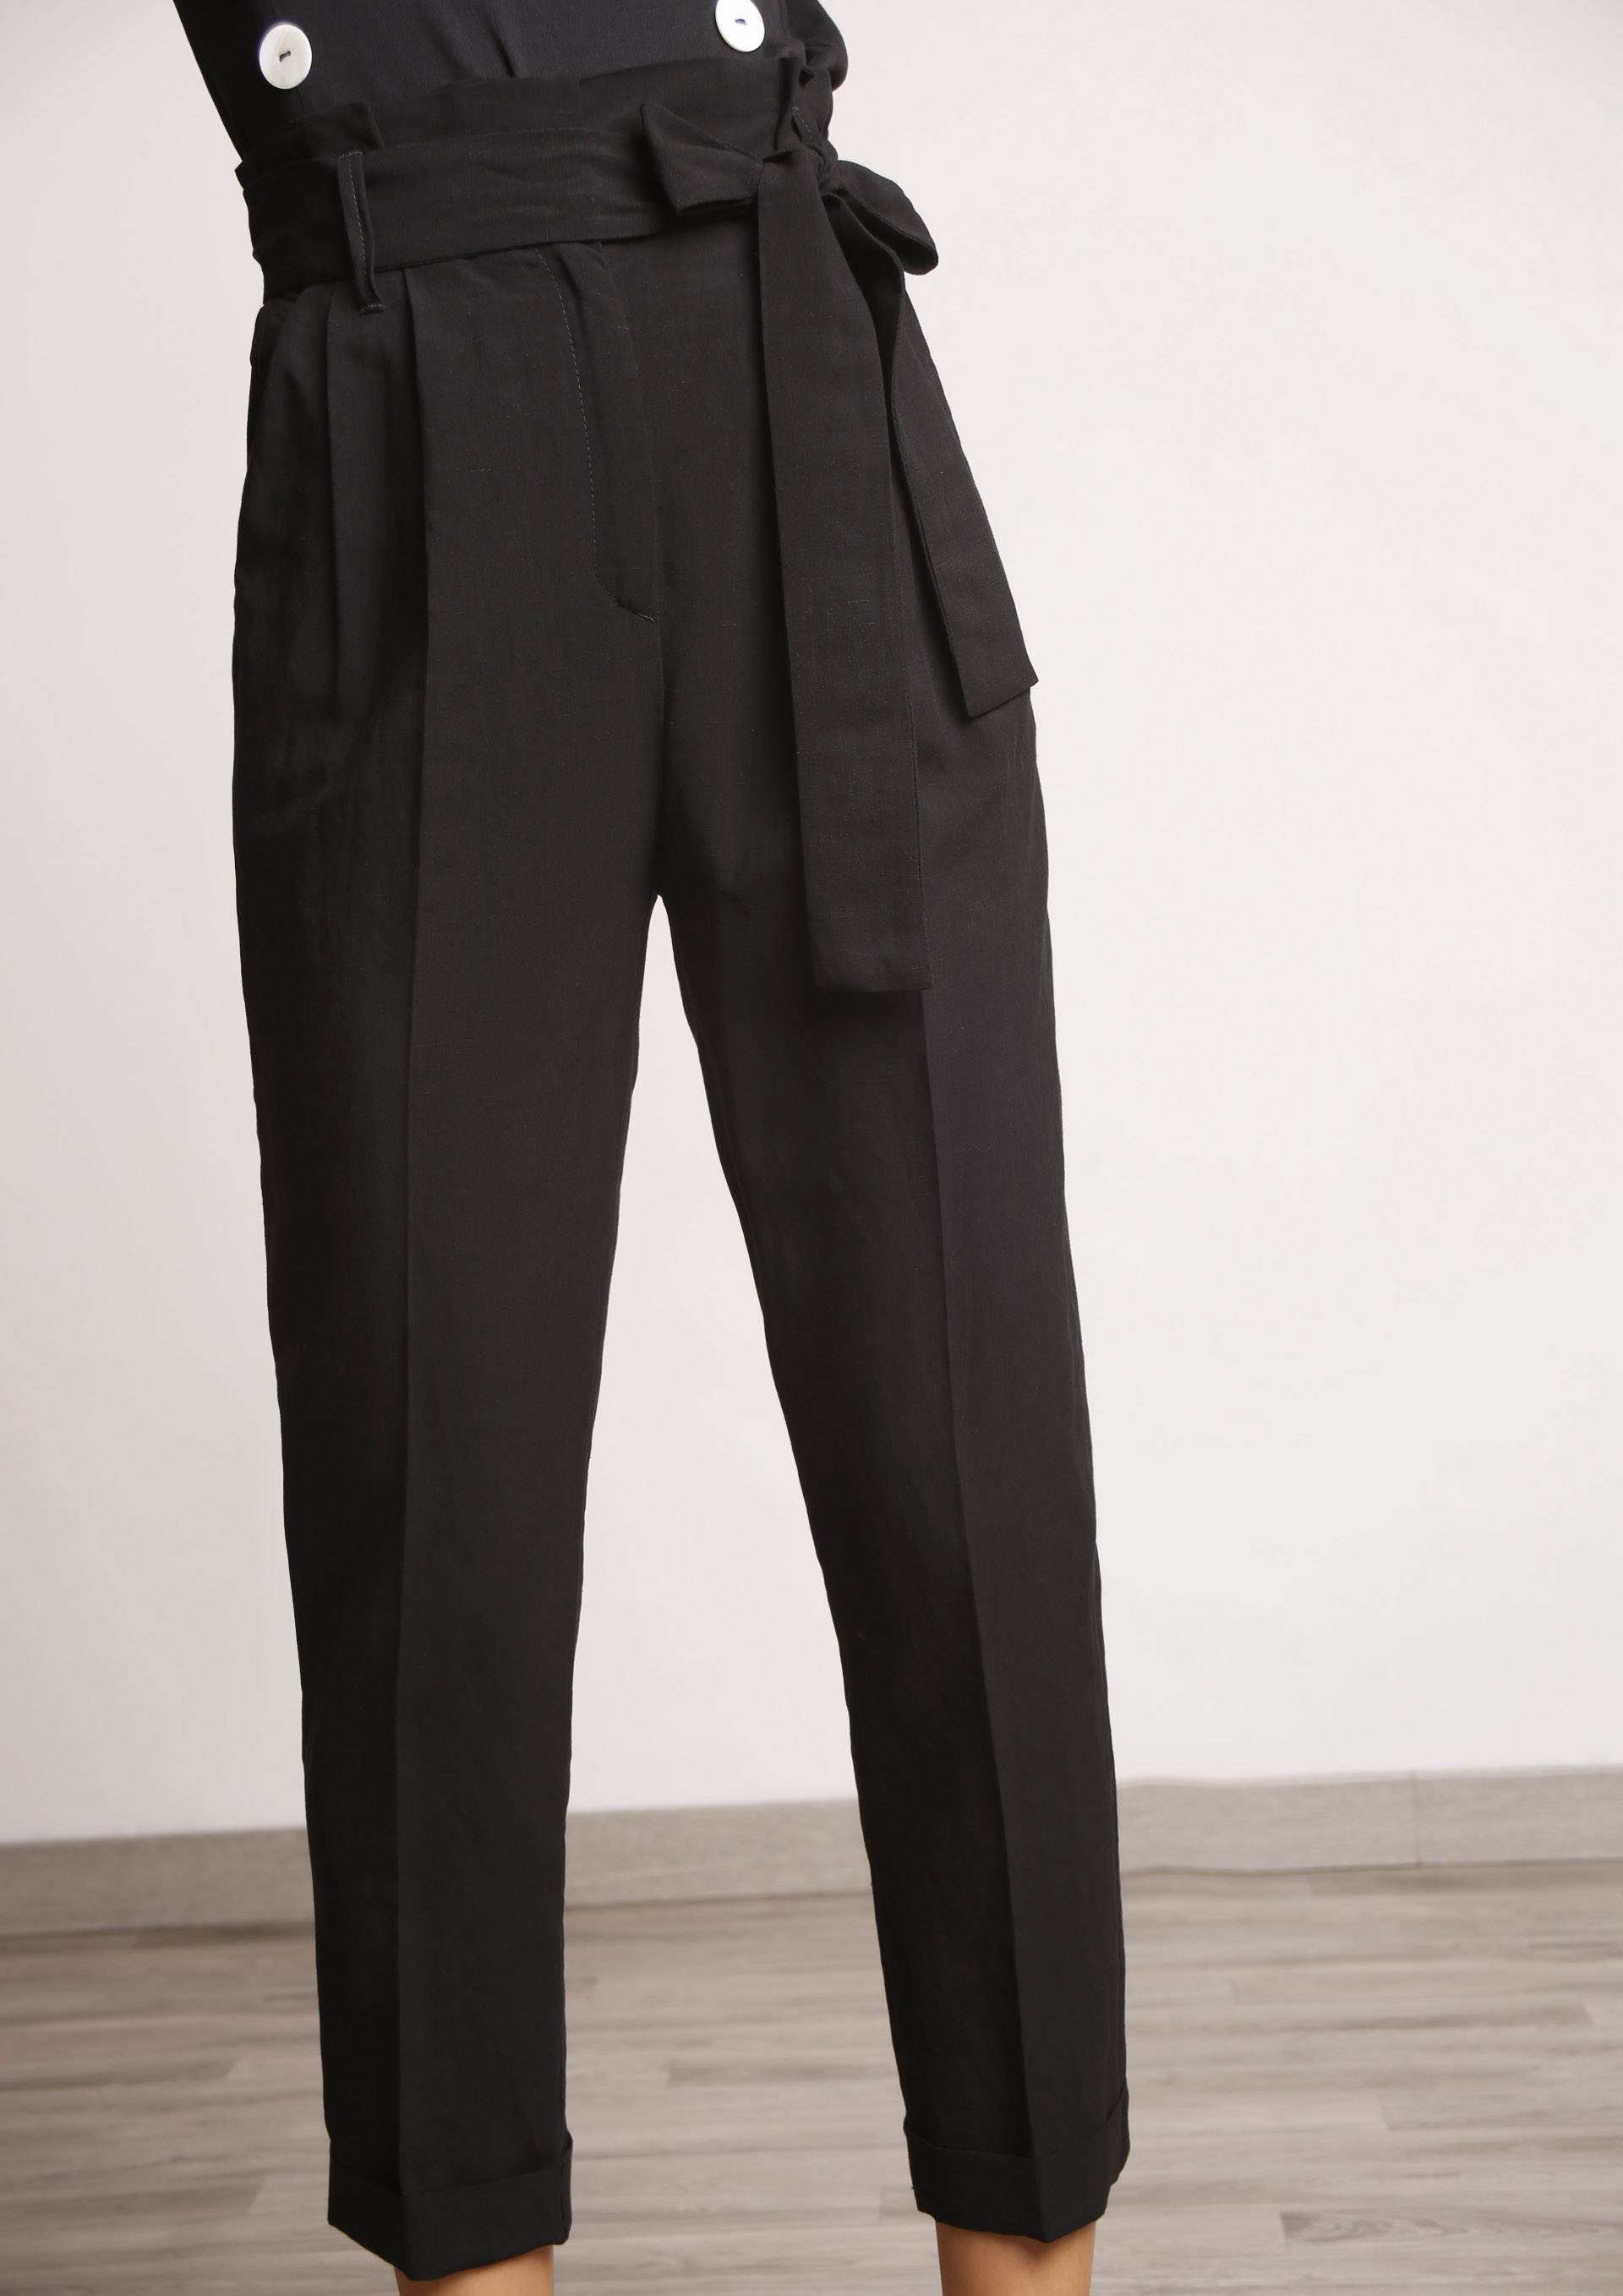 Black ankle length trousers